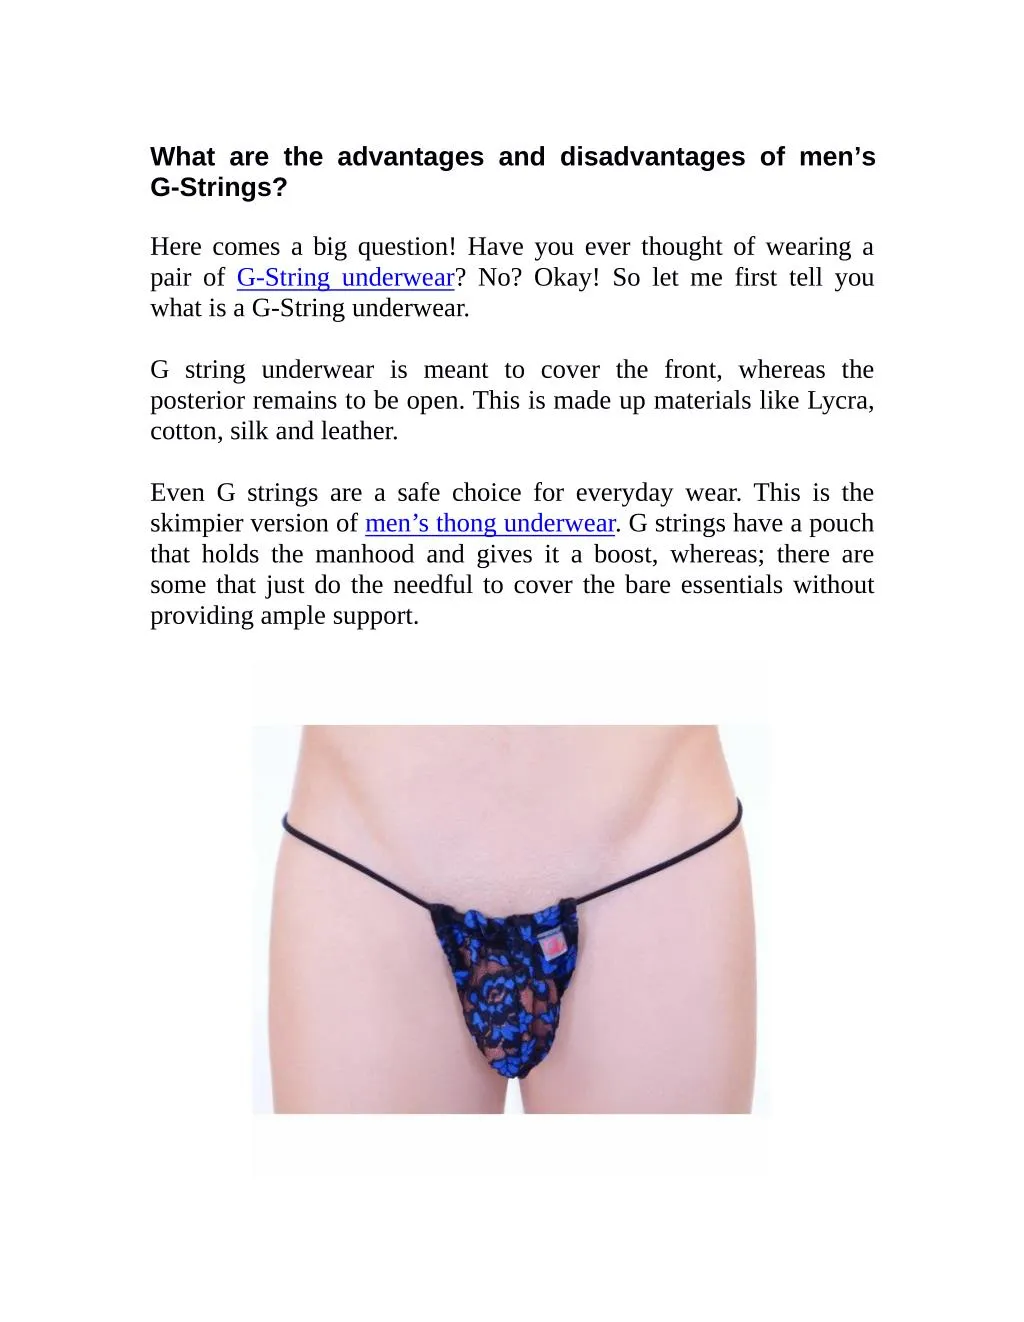 PPT - What are the advantages and disadvantages of men's G-Strings